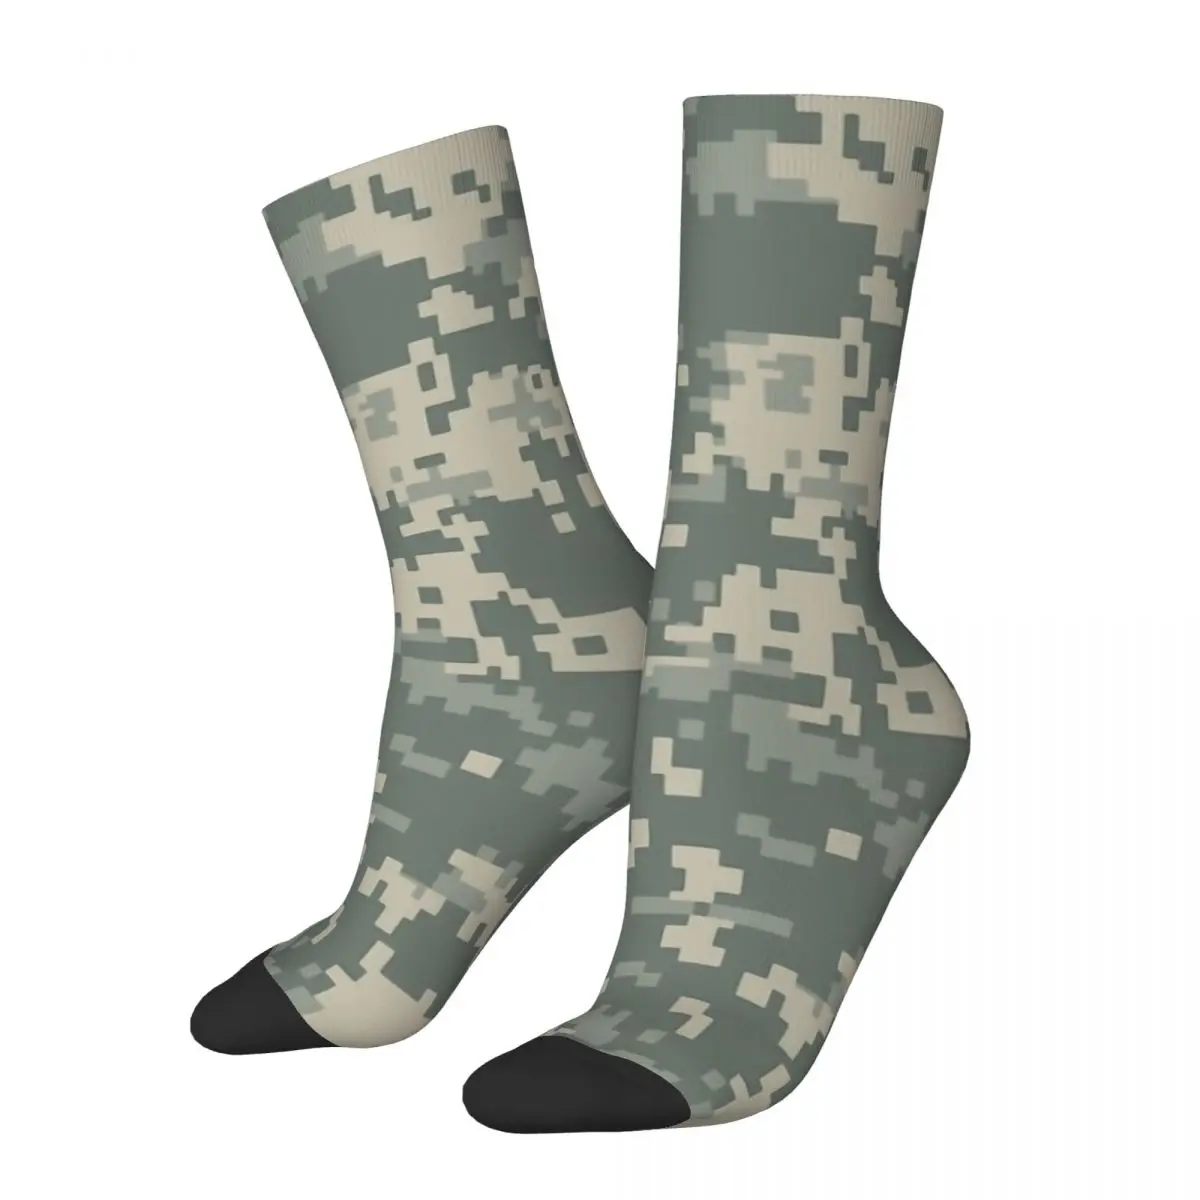 

Funny Crazy Sock for Men Army ACU Hip Hop Harajuku Camo Camouflage Army Happy Seamless Pattern Printed Boys Crew Sock Gift